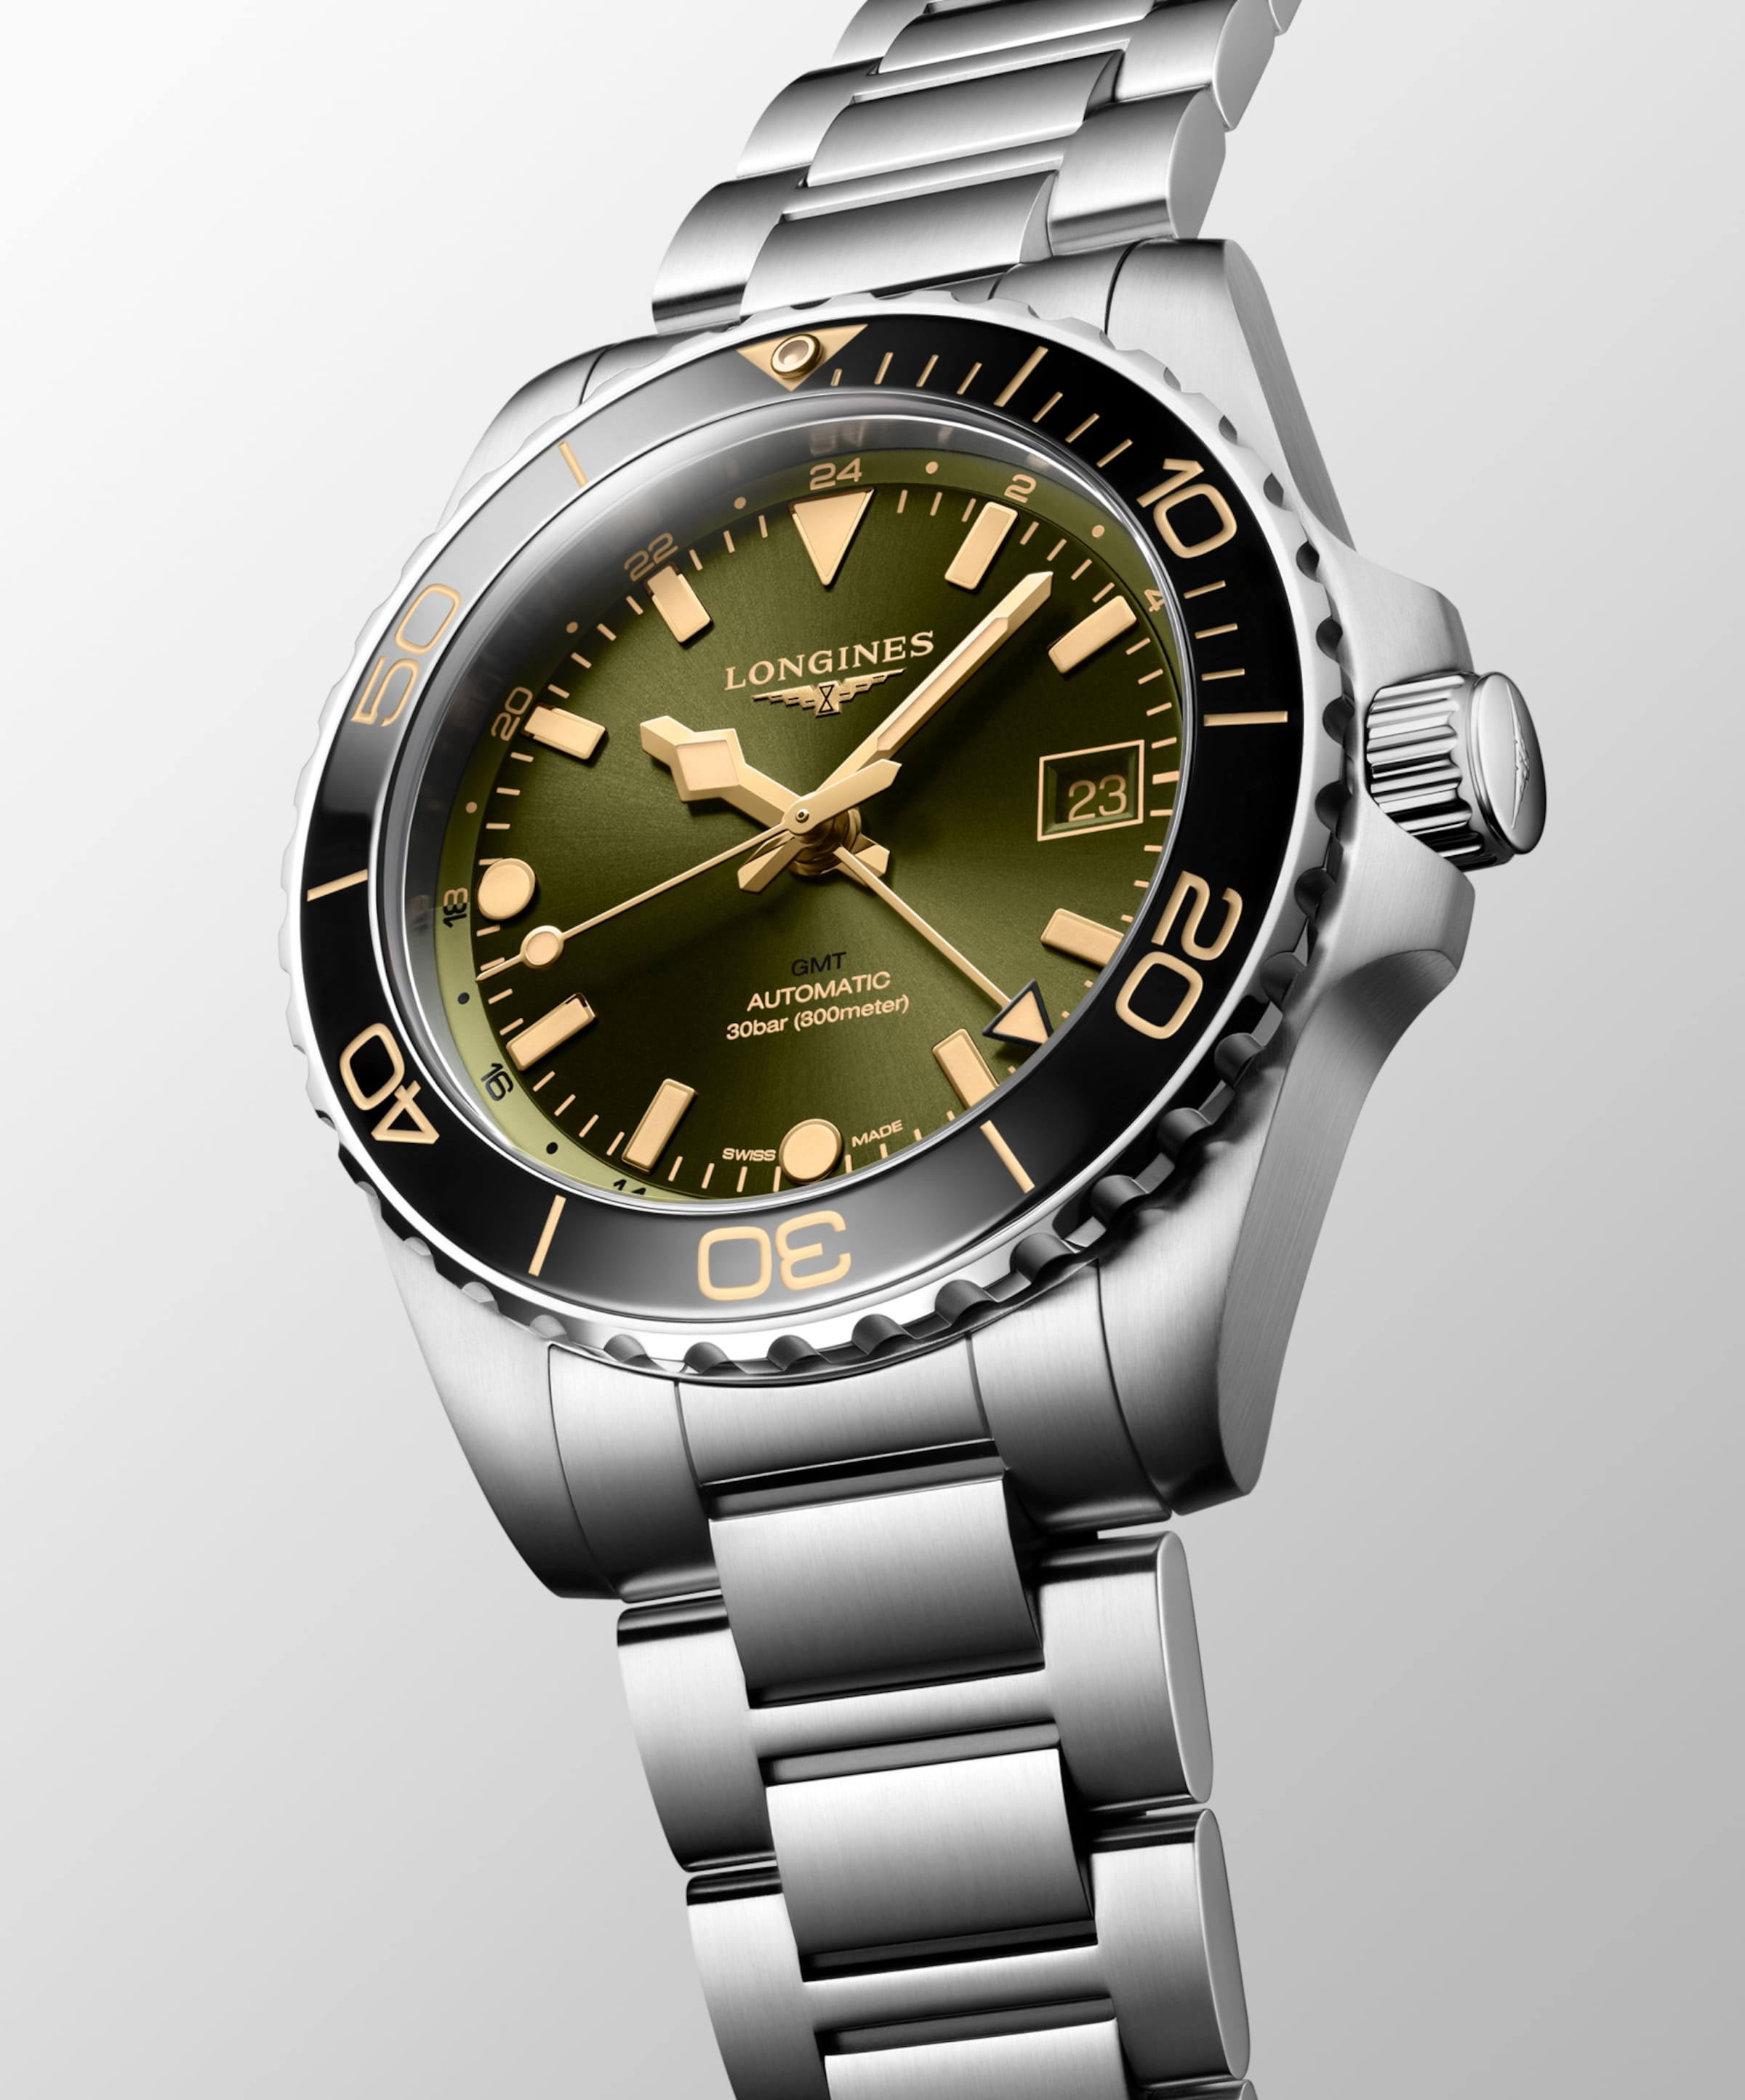 Longines HYDROCONQUEST Automatic Stainless steel and ceramic bezel Watch - L3.790.4.06.6